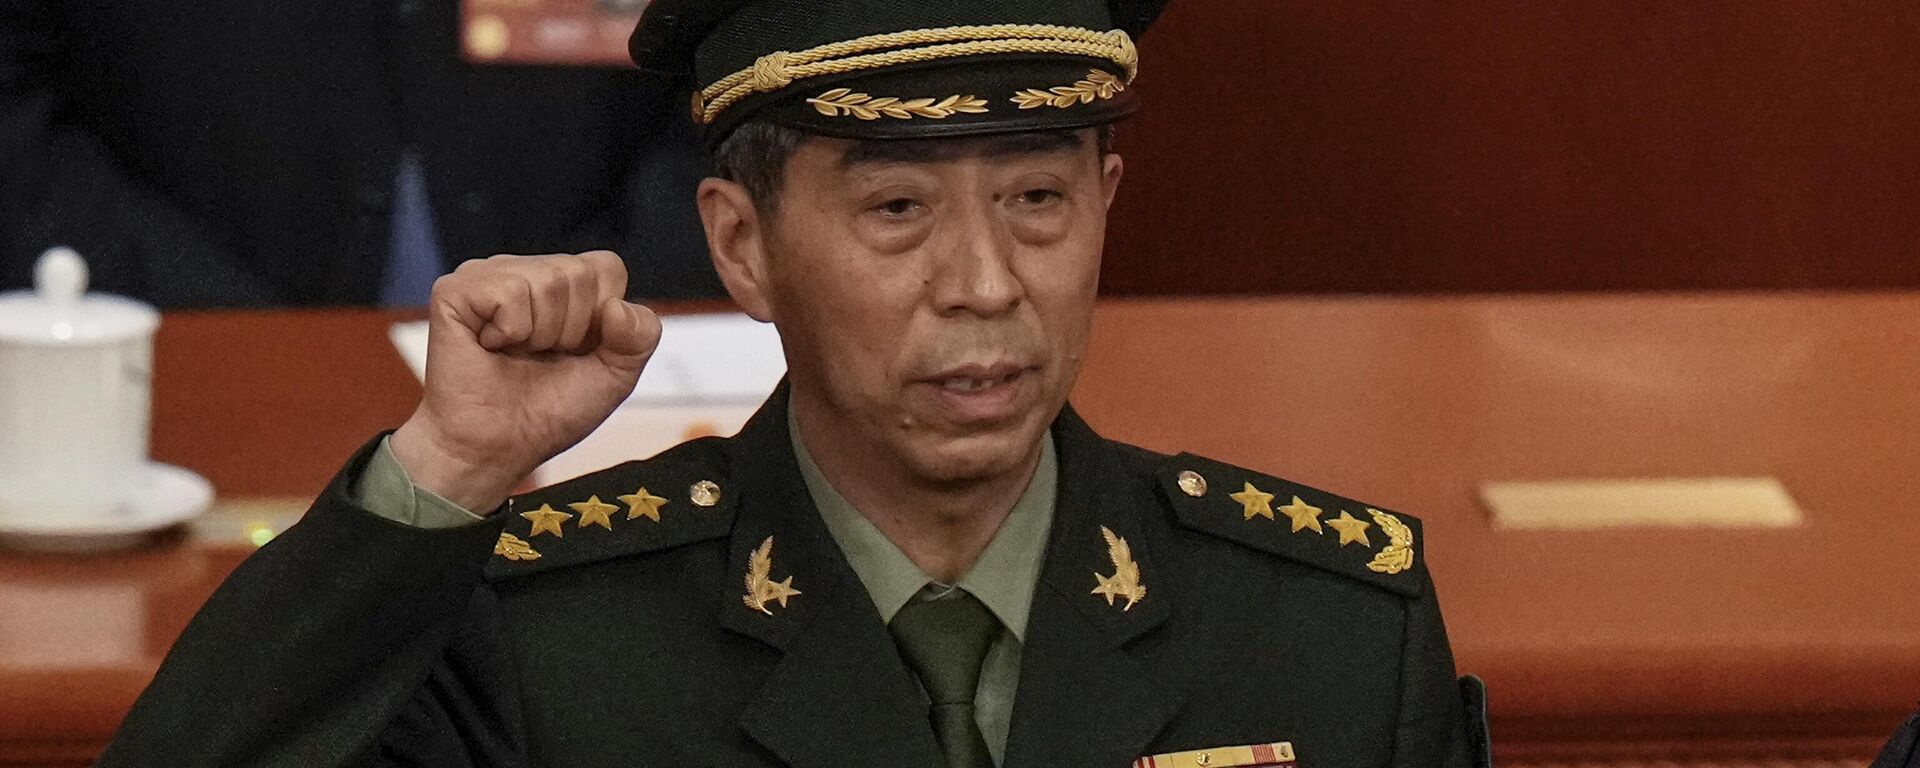 Newly-elected Chinese Defense Minister Gen. Li Shangfu takes his oath during a session of China's National People's Congress (NPC) at the Great Hall of the People in Beijing on March 12, 2023. - Sputnik International, 1920, 11.05.2023